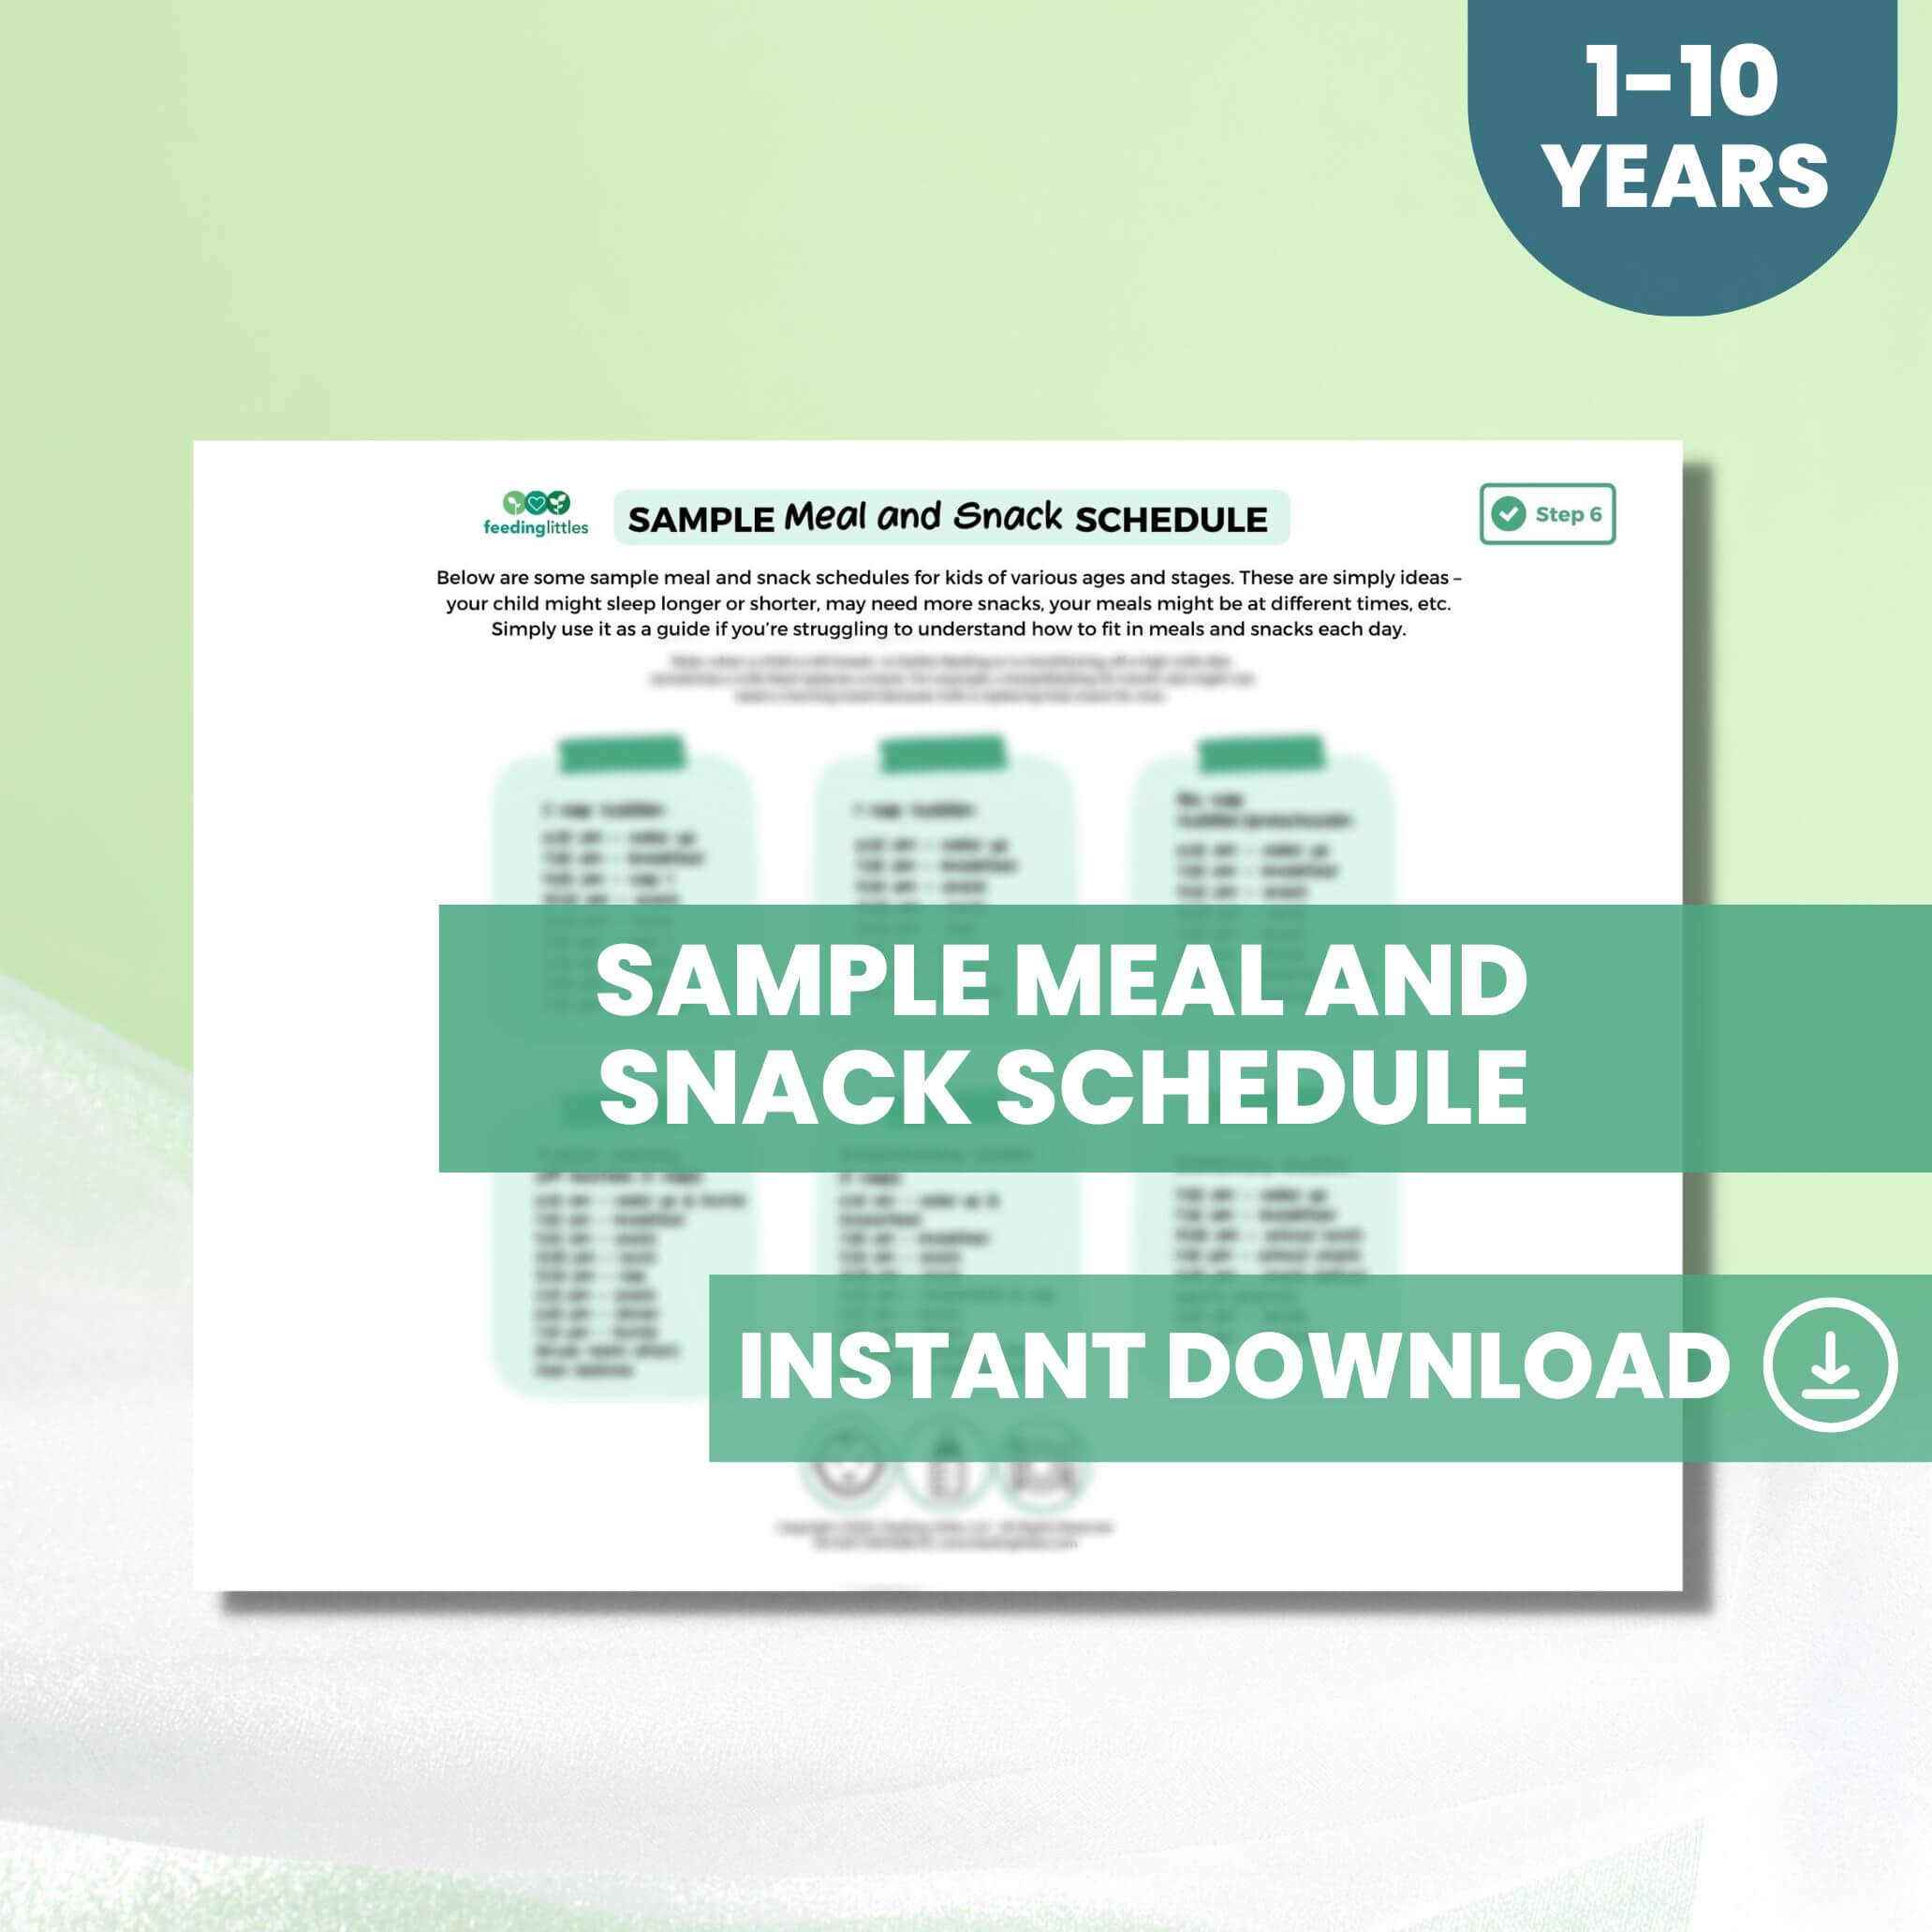 Sample Meal and Snack Schedule